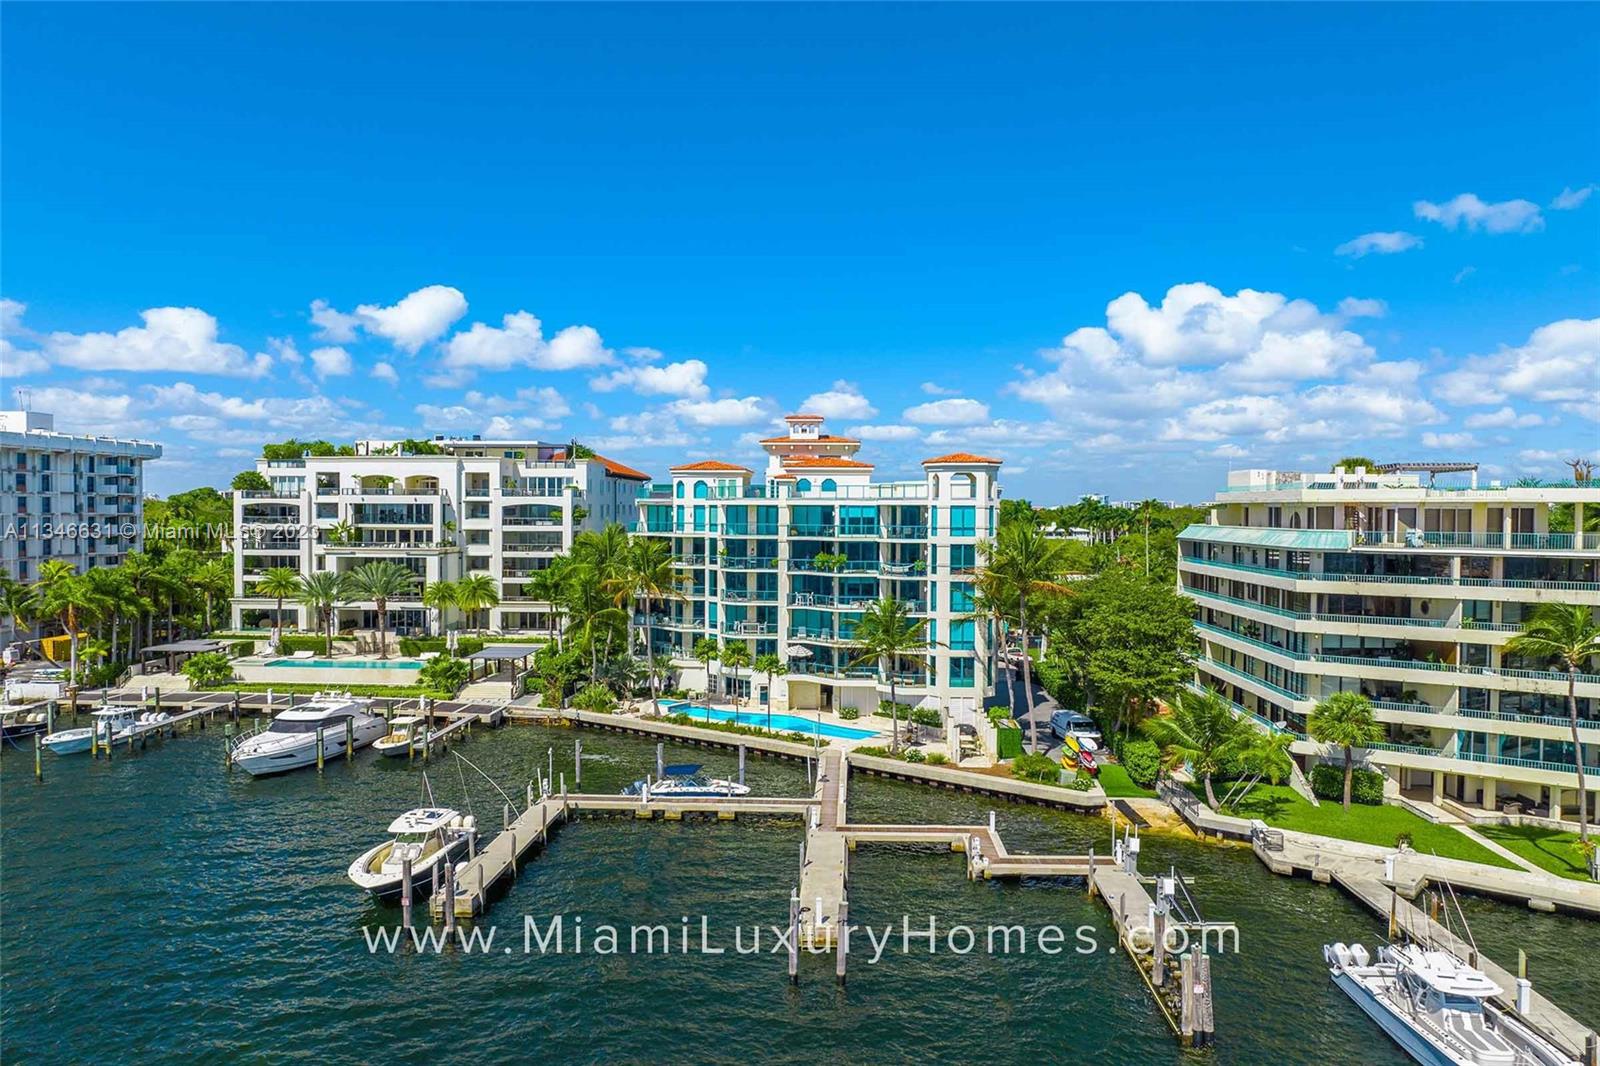 Beacon Harbour #101 is a bespoke waterfront residence offering a custom-designed floor plan with 4 bedrooms and 4 spa-like bathrooms, ideally situated along Biscayne Bay in a boutique gated 10-unit condo building in Coconut Grove. Private elevator/entrance foyer with a soothing water feature leads into 3,812 SF of opulent interior living space boasting natural bamboo flooring with stone inlays and furnished with custom pieces to match a serene lifestyle. Perfect for entertaining, this home includes Lutron lighting, Sonos surround sound, gourmet kitchen with Chef's French gas cooktop island, floor-to-ceiling windows and glass doors throughout and 3 expansive terraces boasting breathtaking bay views. Unit includes 3 assigned parking spaces. Exclusive amenities-bayfront pool, gym and marina.